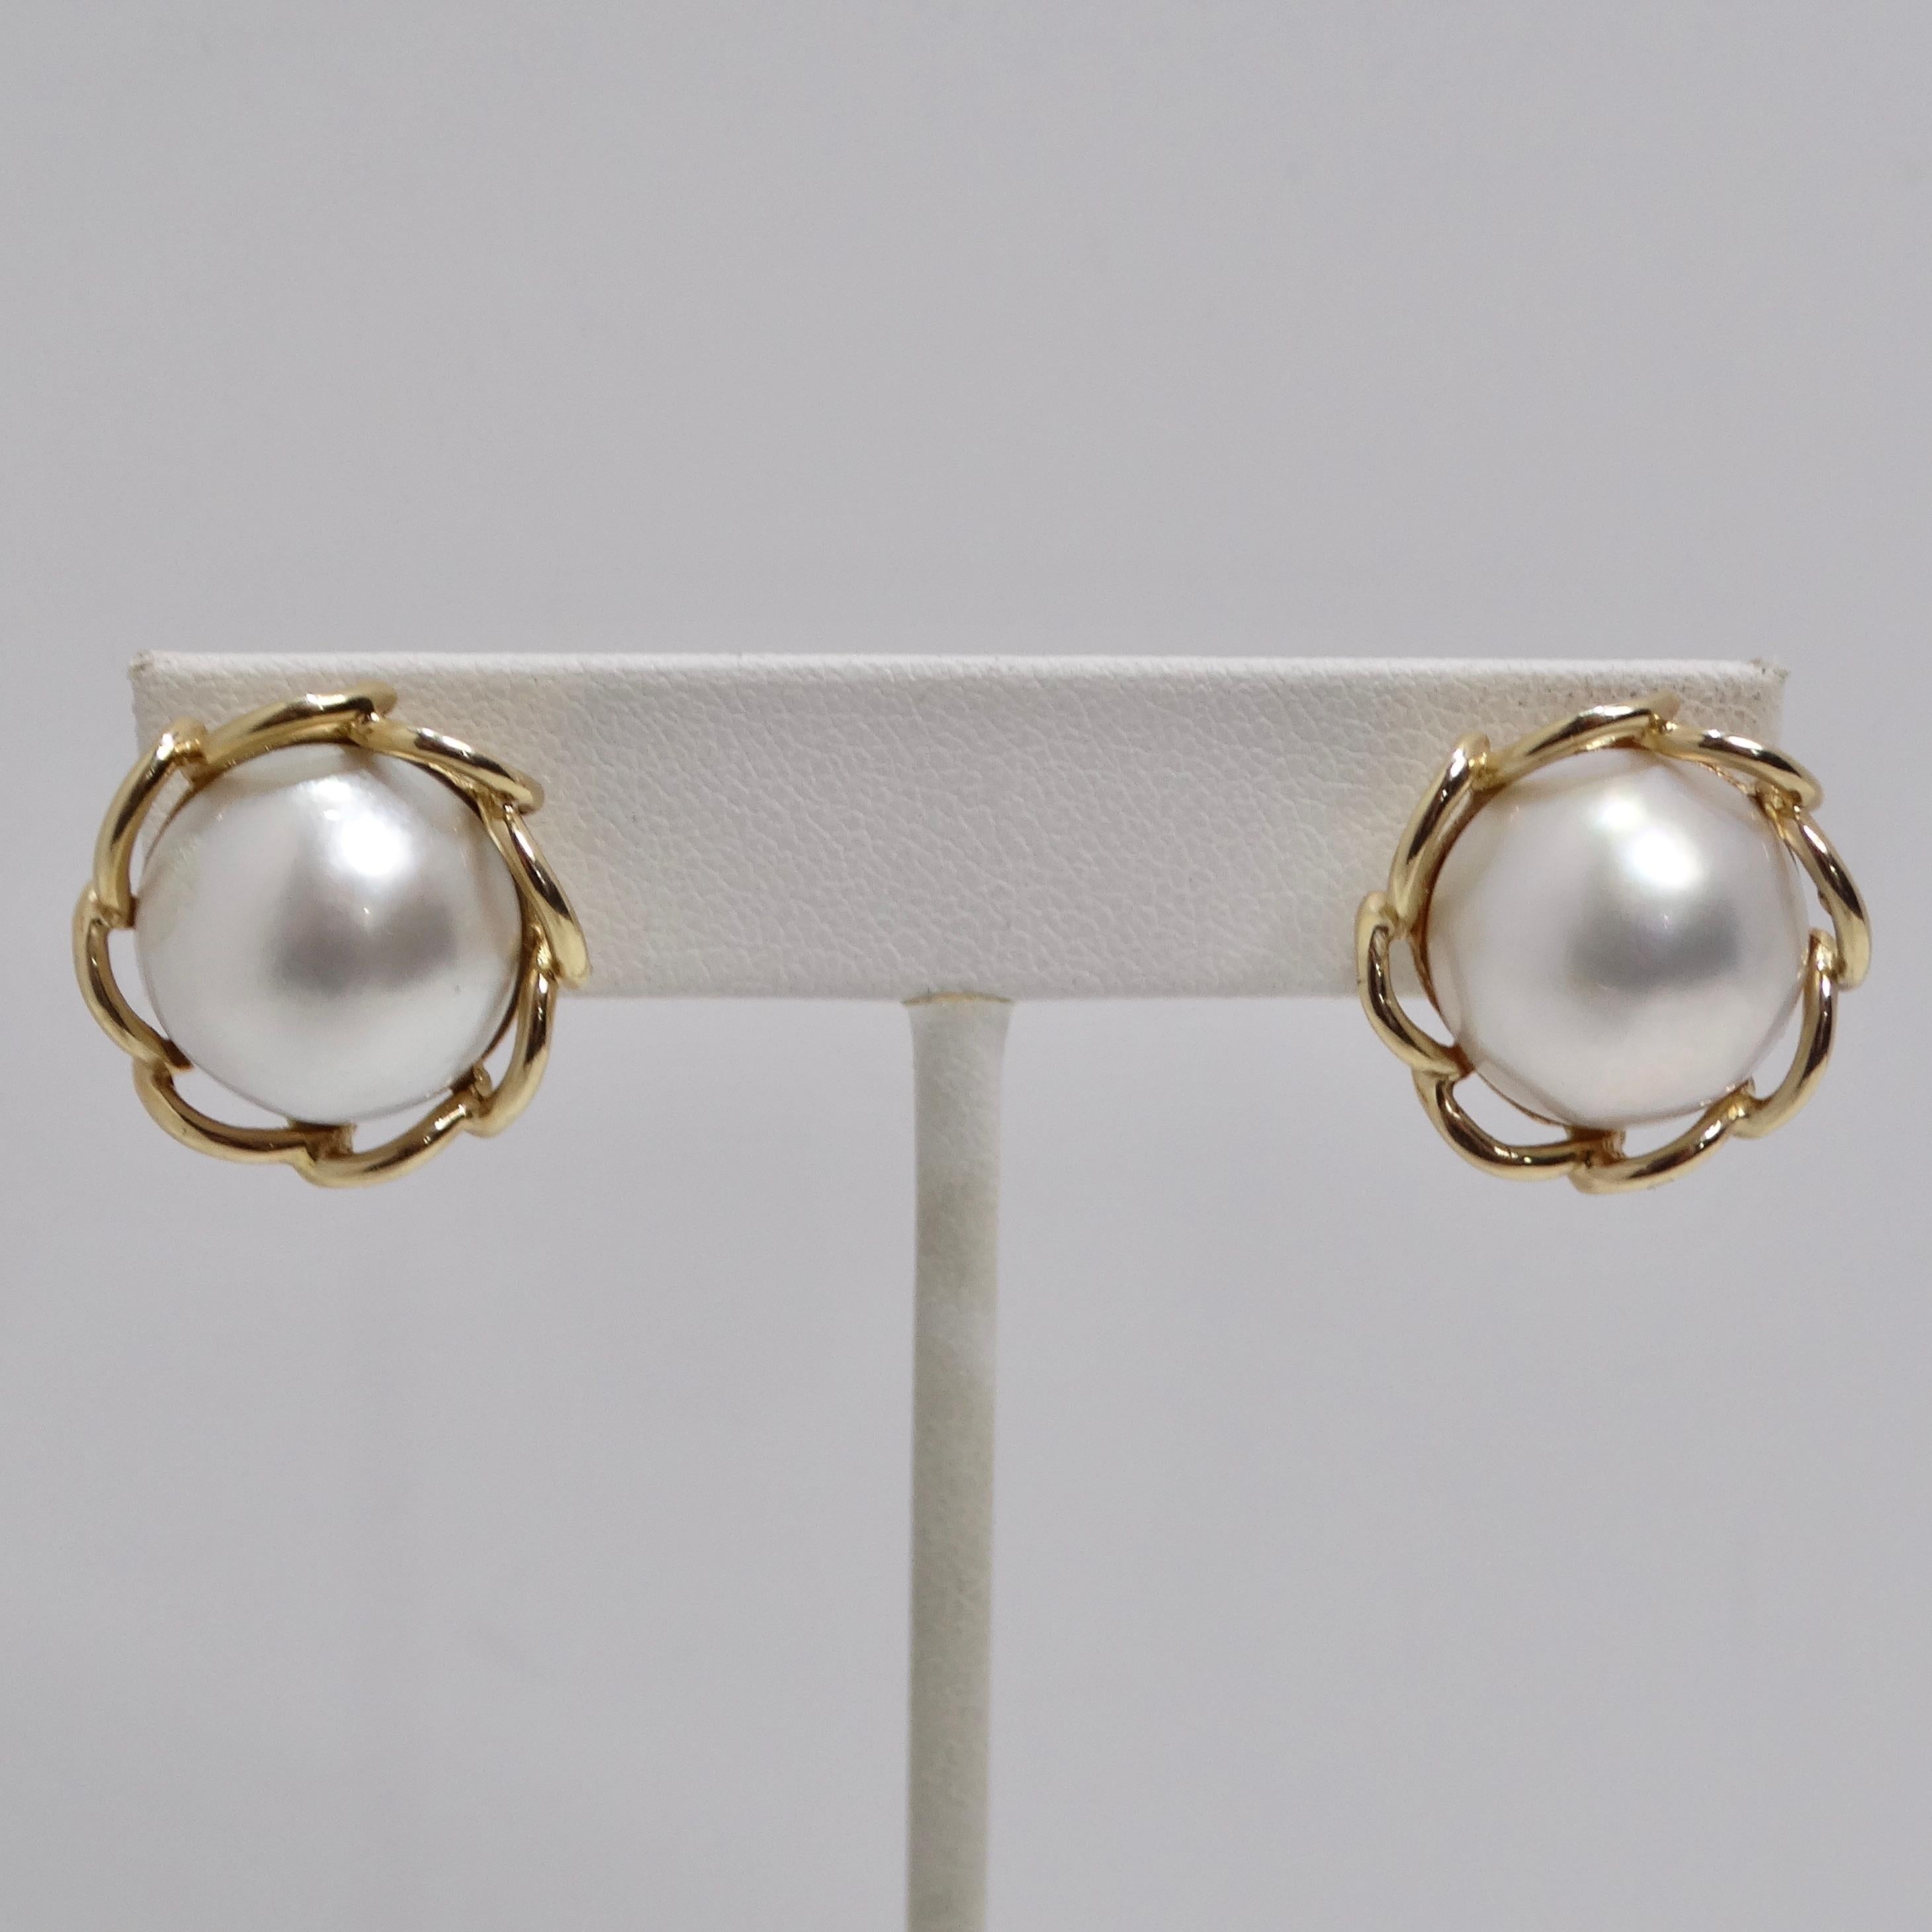 1970s 14K Gold Pearl Clip On Stud Earrings In Good Condition For Sale In Scottsdale, AZ